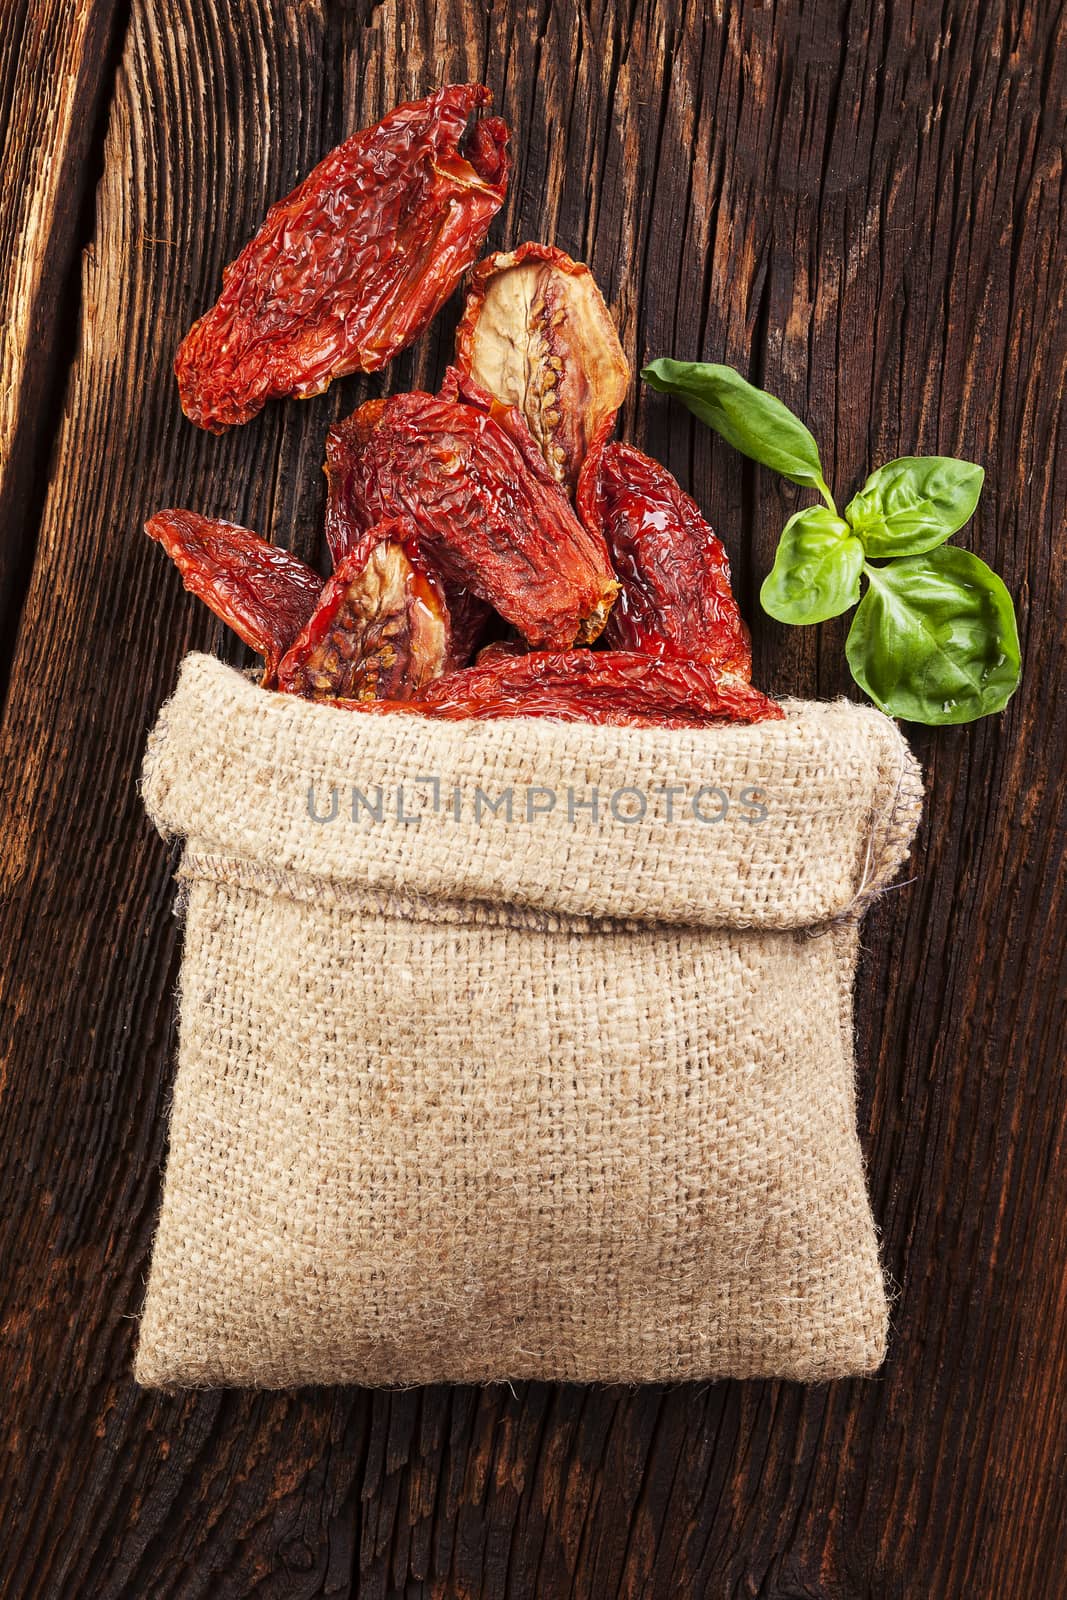 Sundried tomatoes. by eskymaks